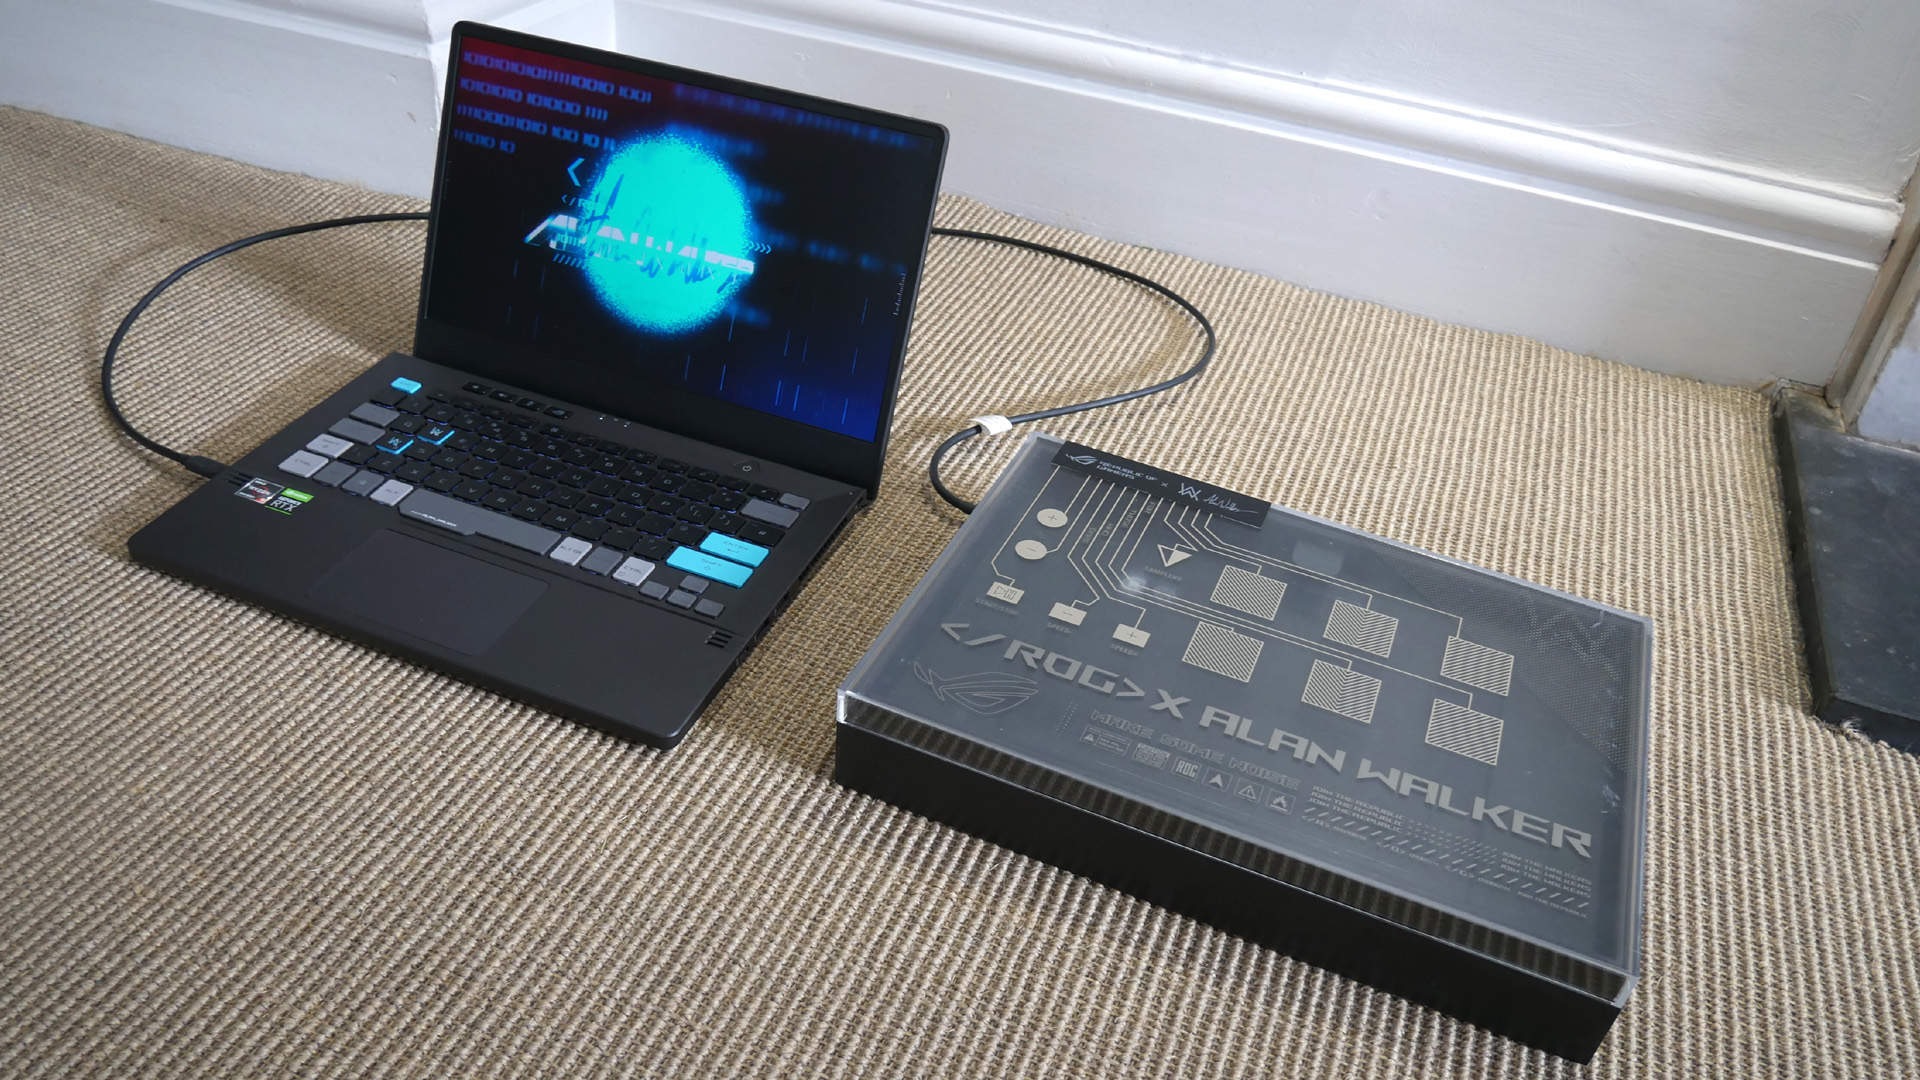 Asus ROG Zephyrus G14 Alan Walker Special Edition with its synth or mixing pad box on a carpeted floor